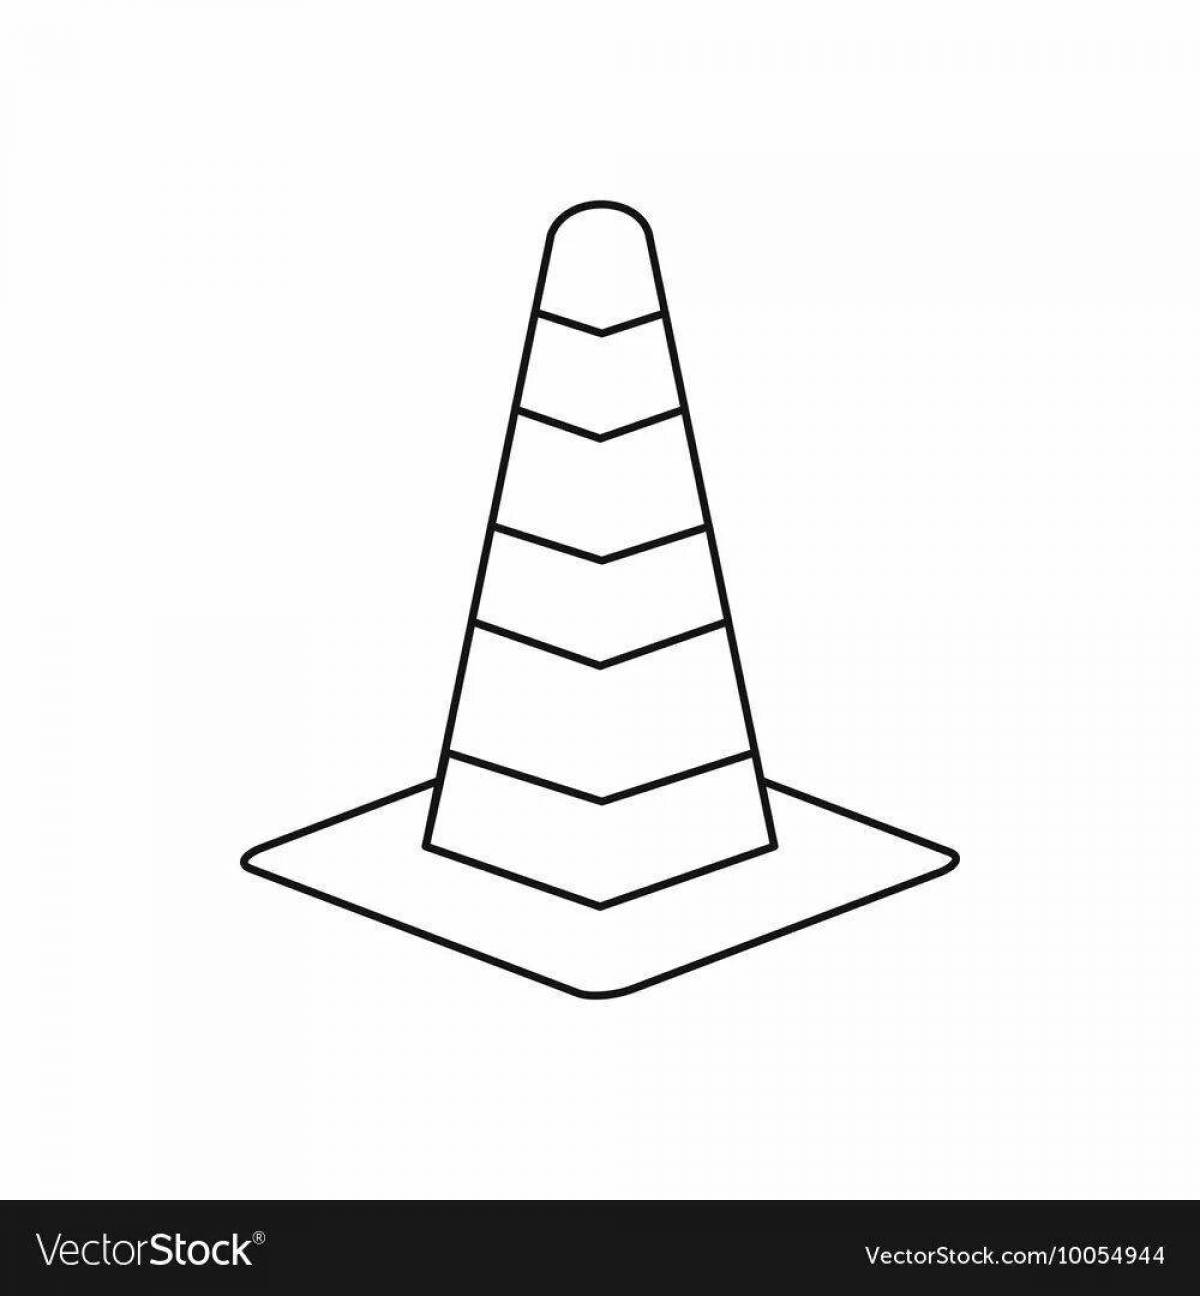 Playful cone coloring page